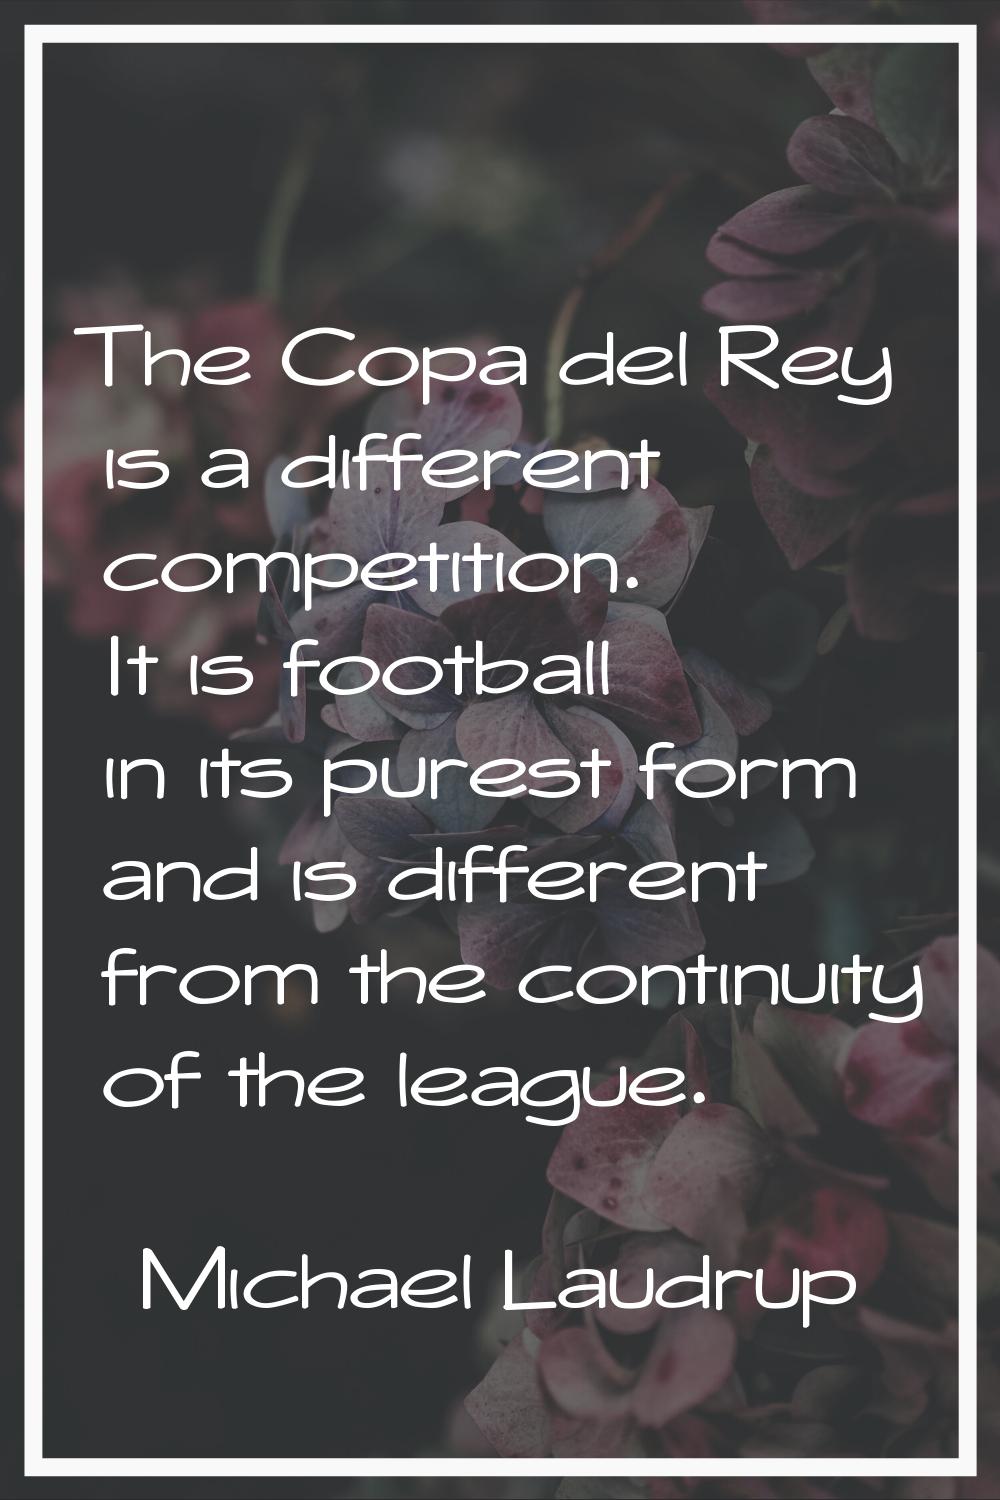 The Copa del Rey is a different competition. It is football in its purest form and is different fro